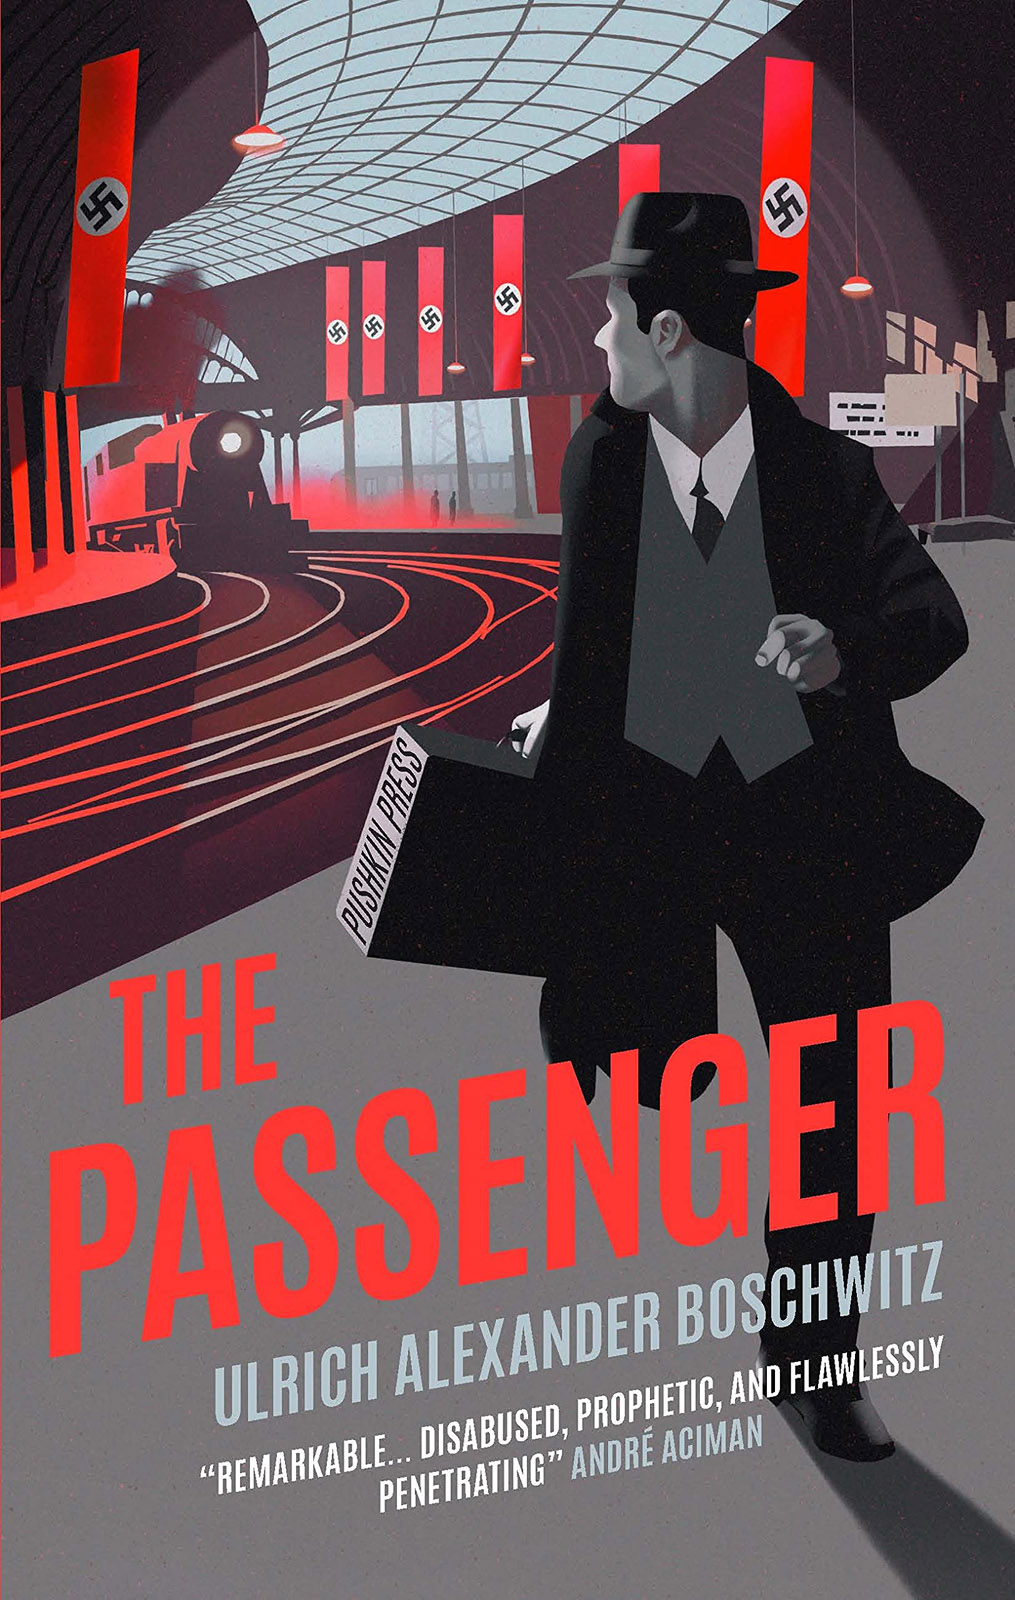 Cover, The Passenger by Ulrich Alexander Boschwitz